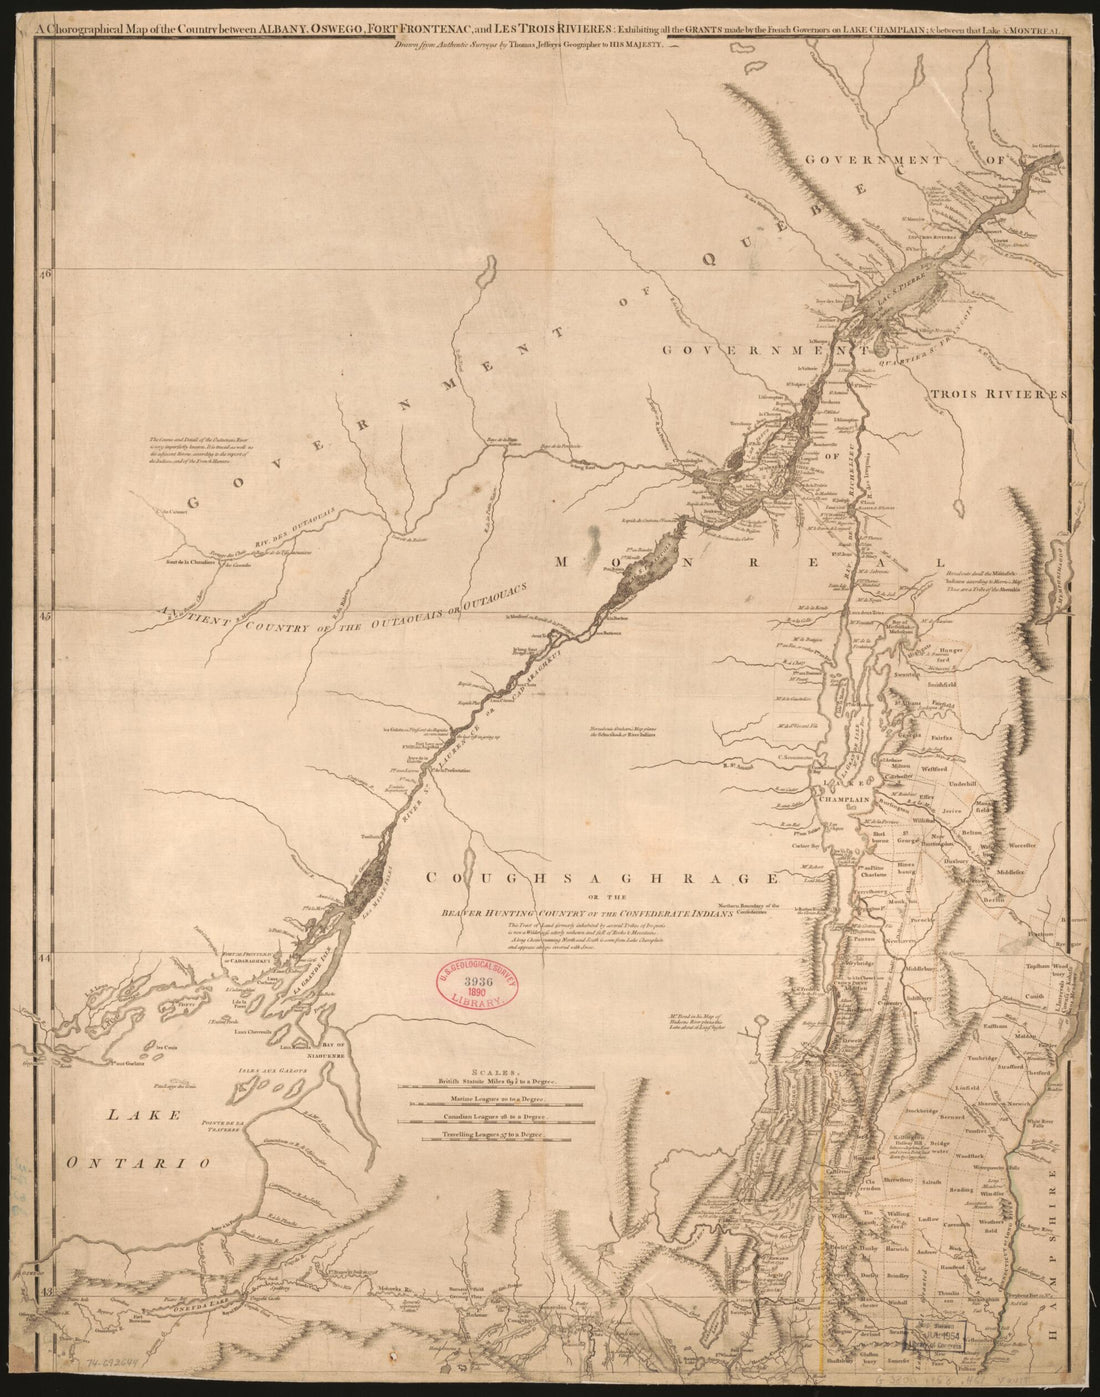 This old map of The Provinces of New York, and New Jersey; With Part of Pensilvania, and the Governments of Trois Rivières, and Montreal: from 1768 was created by Samuel] [Holland, Thomas Jefferys, Robert Sayer in 1768